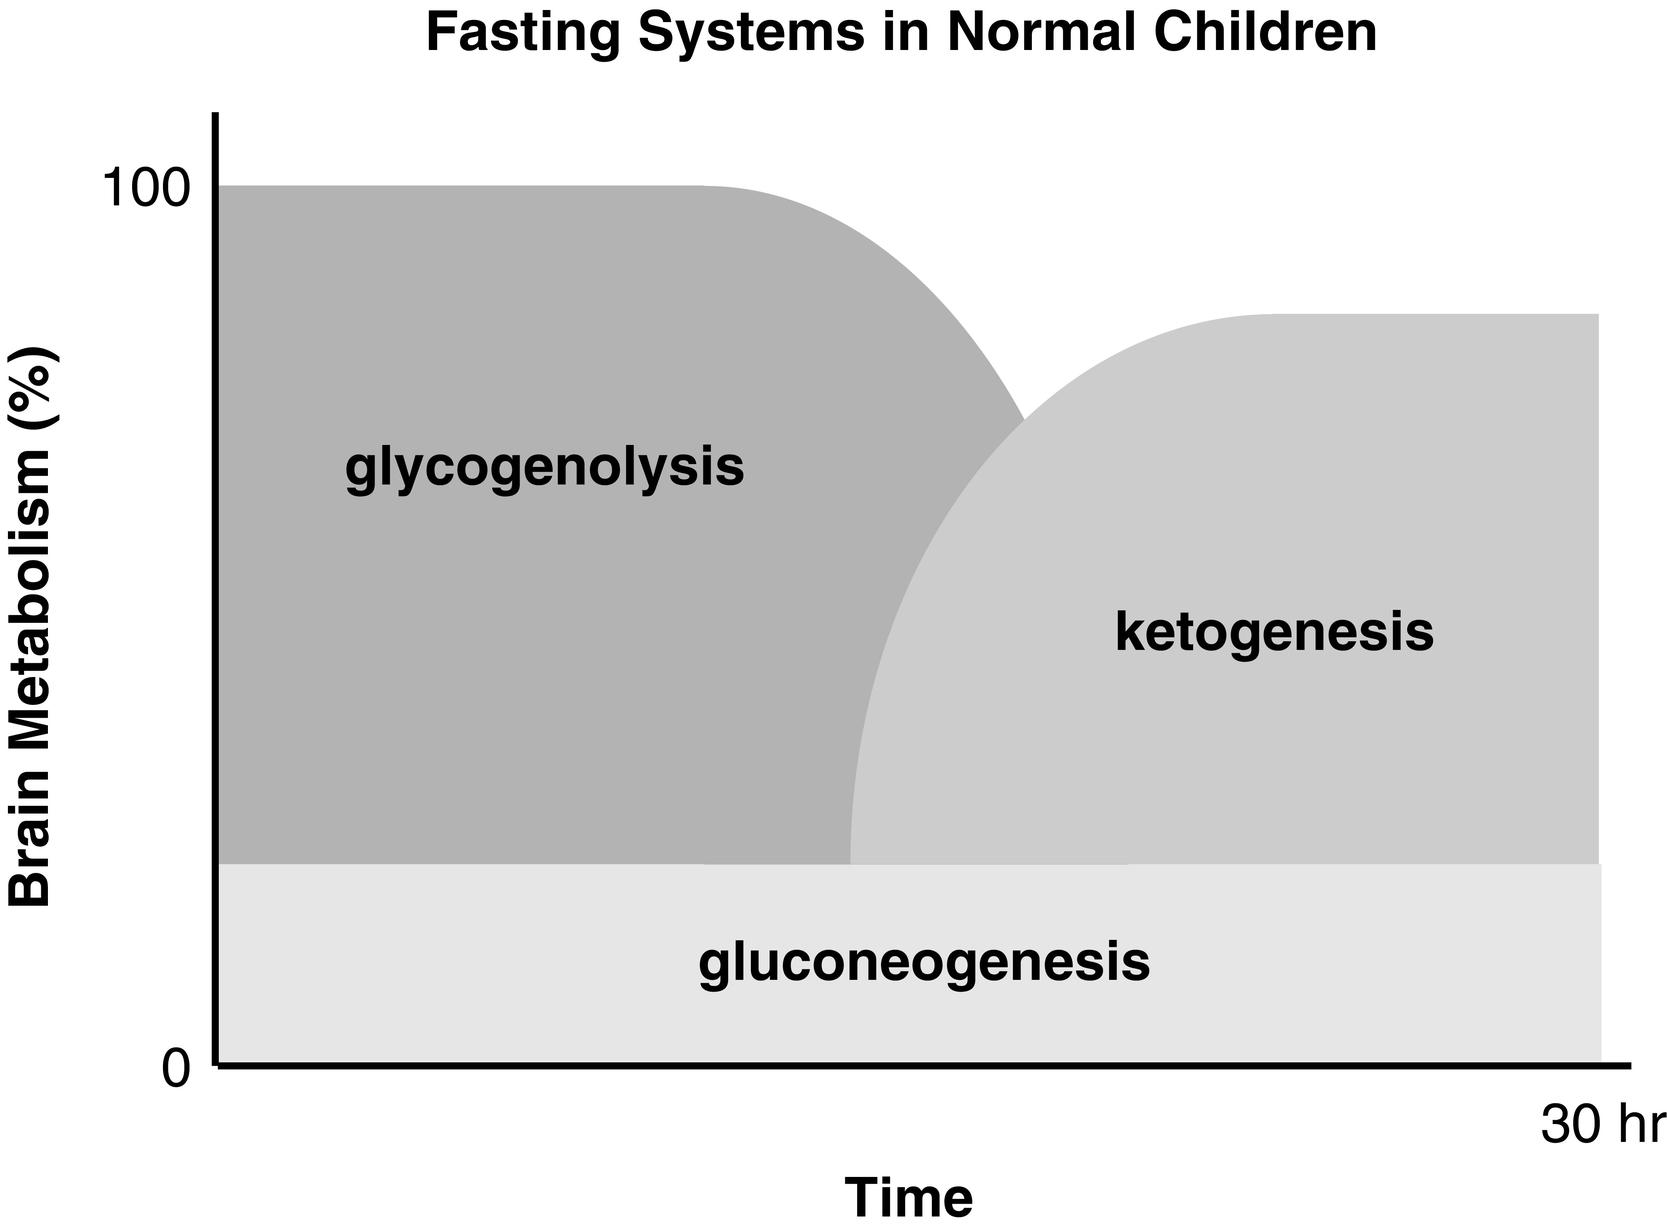 Fig. 7.2, Contribution of major fasting systems to brain metabolism over time in a typical normal infant. Note that glycogen stores are depleted by 8 to 12 hours and that ketogenesis becomes the major source of brain substrate by 24 hours.